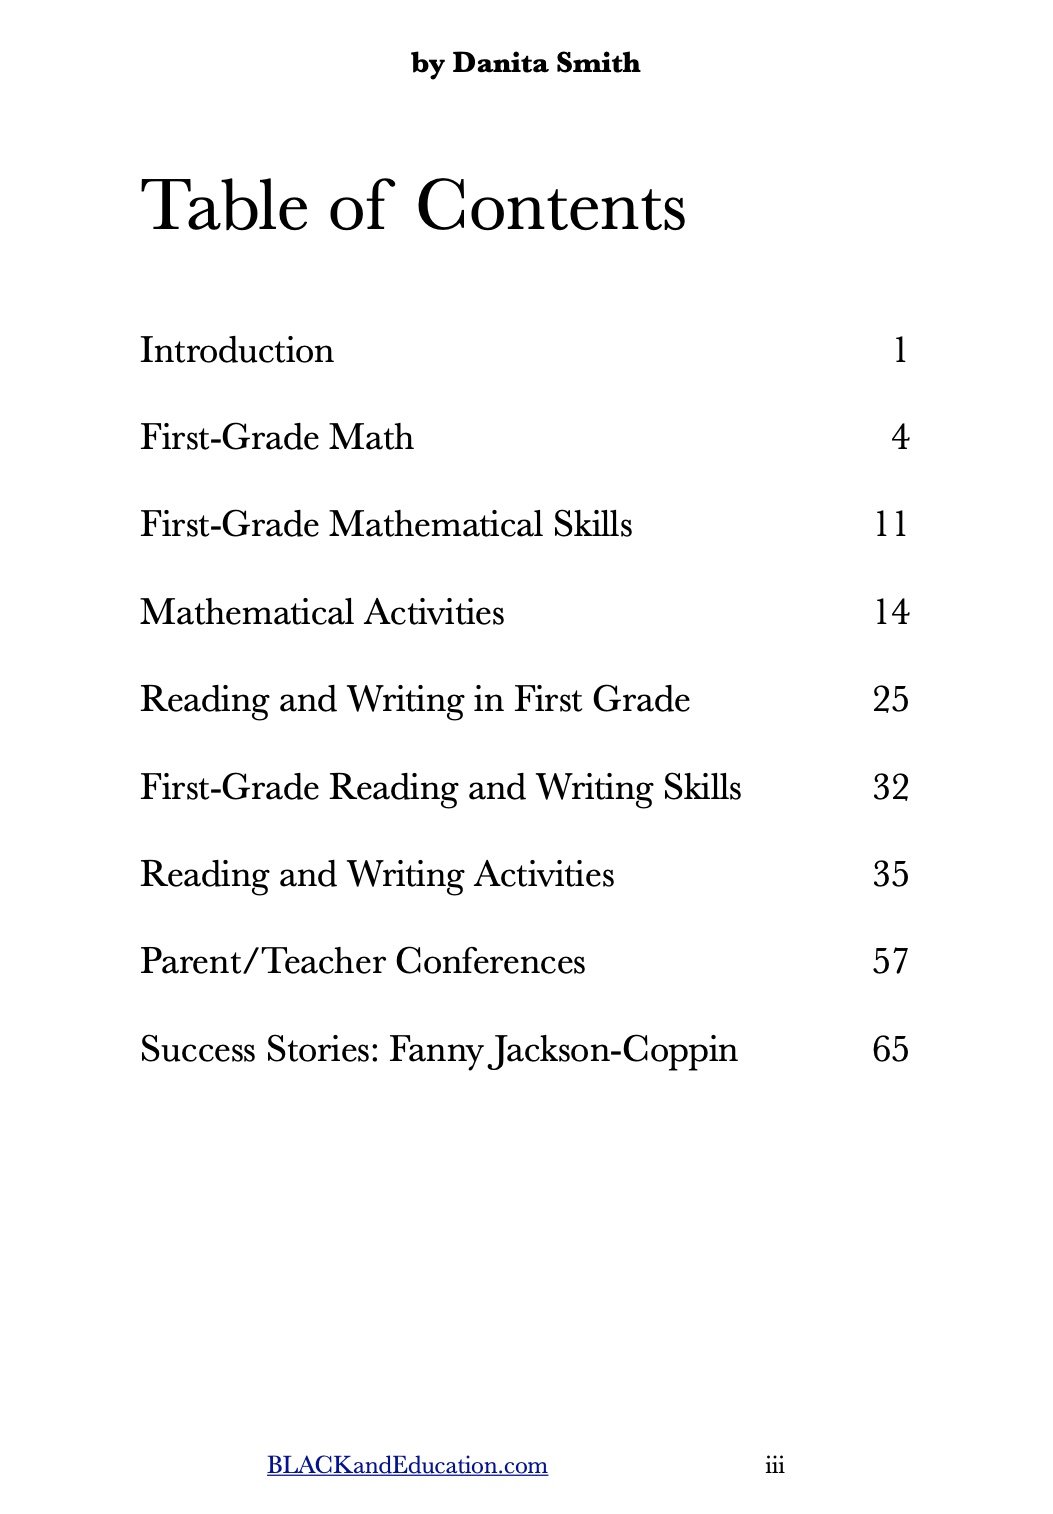 1st grade table of contents.jpg